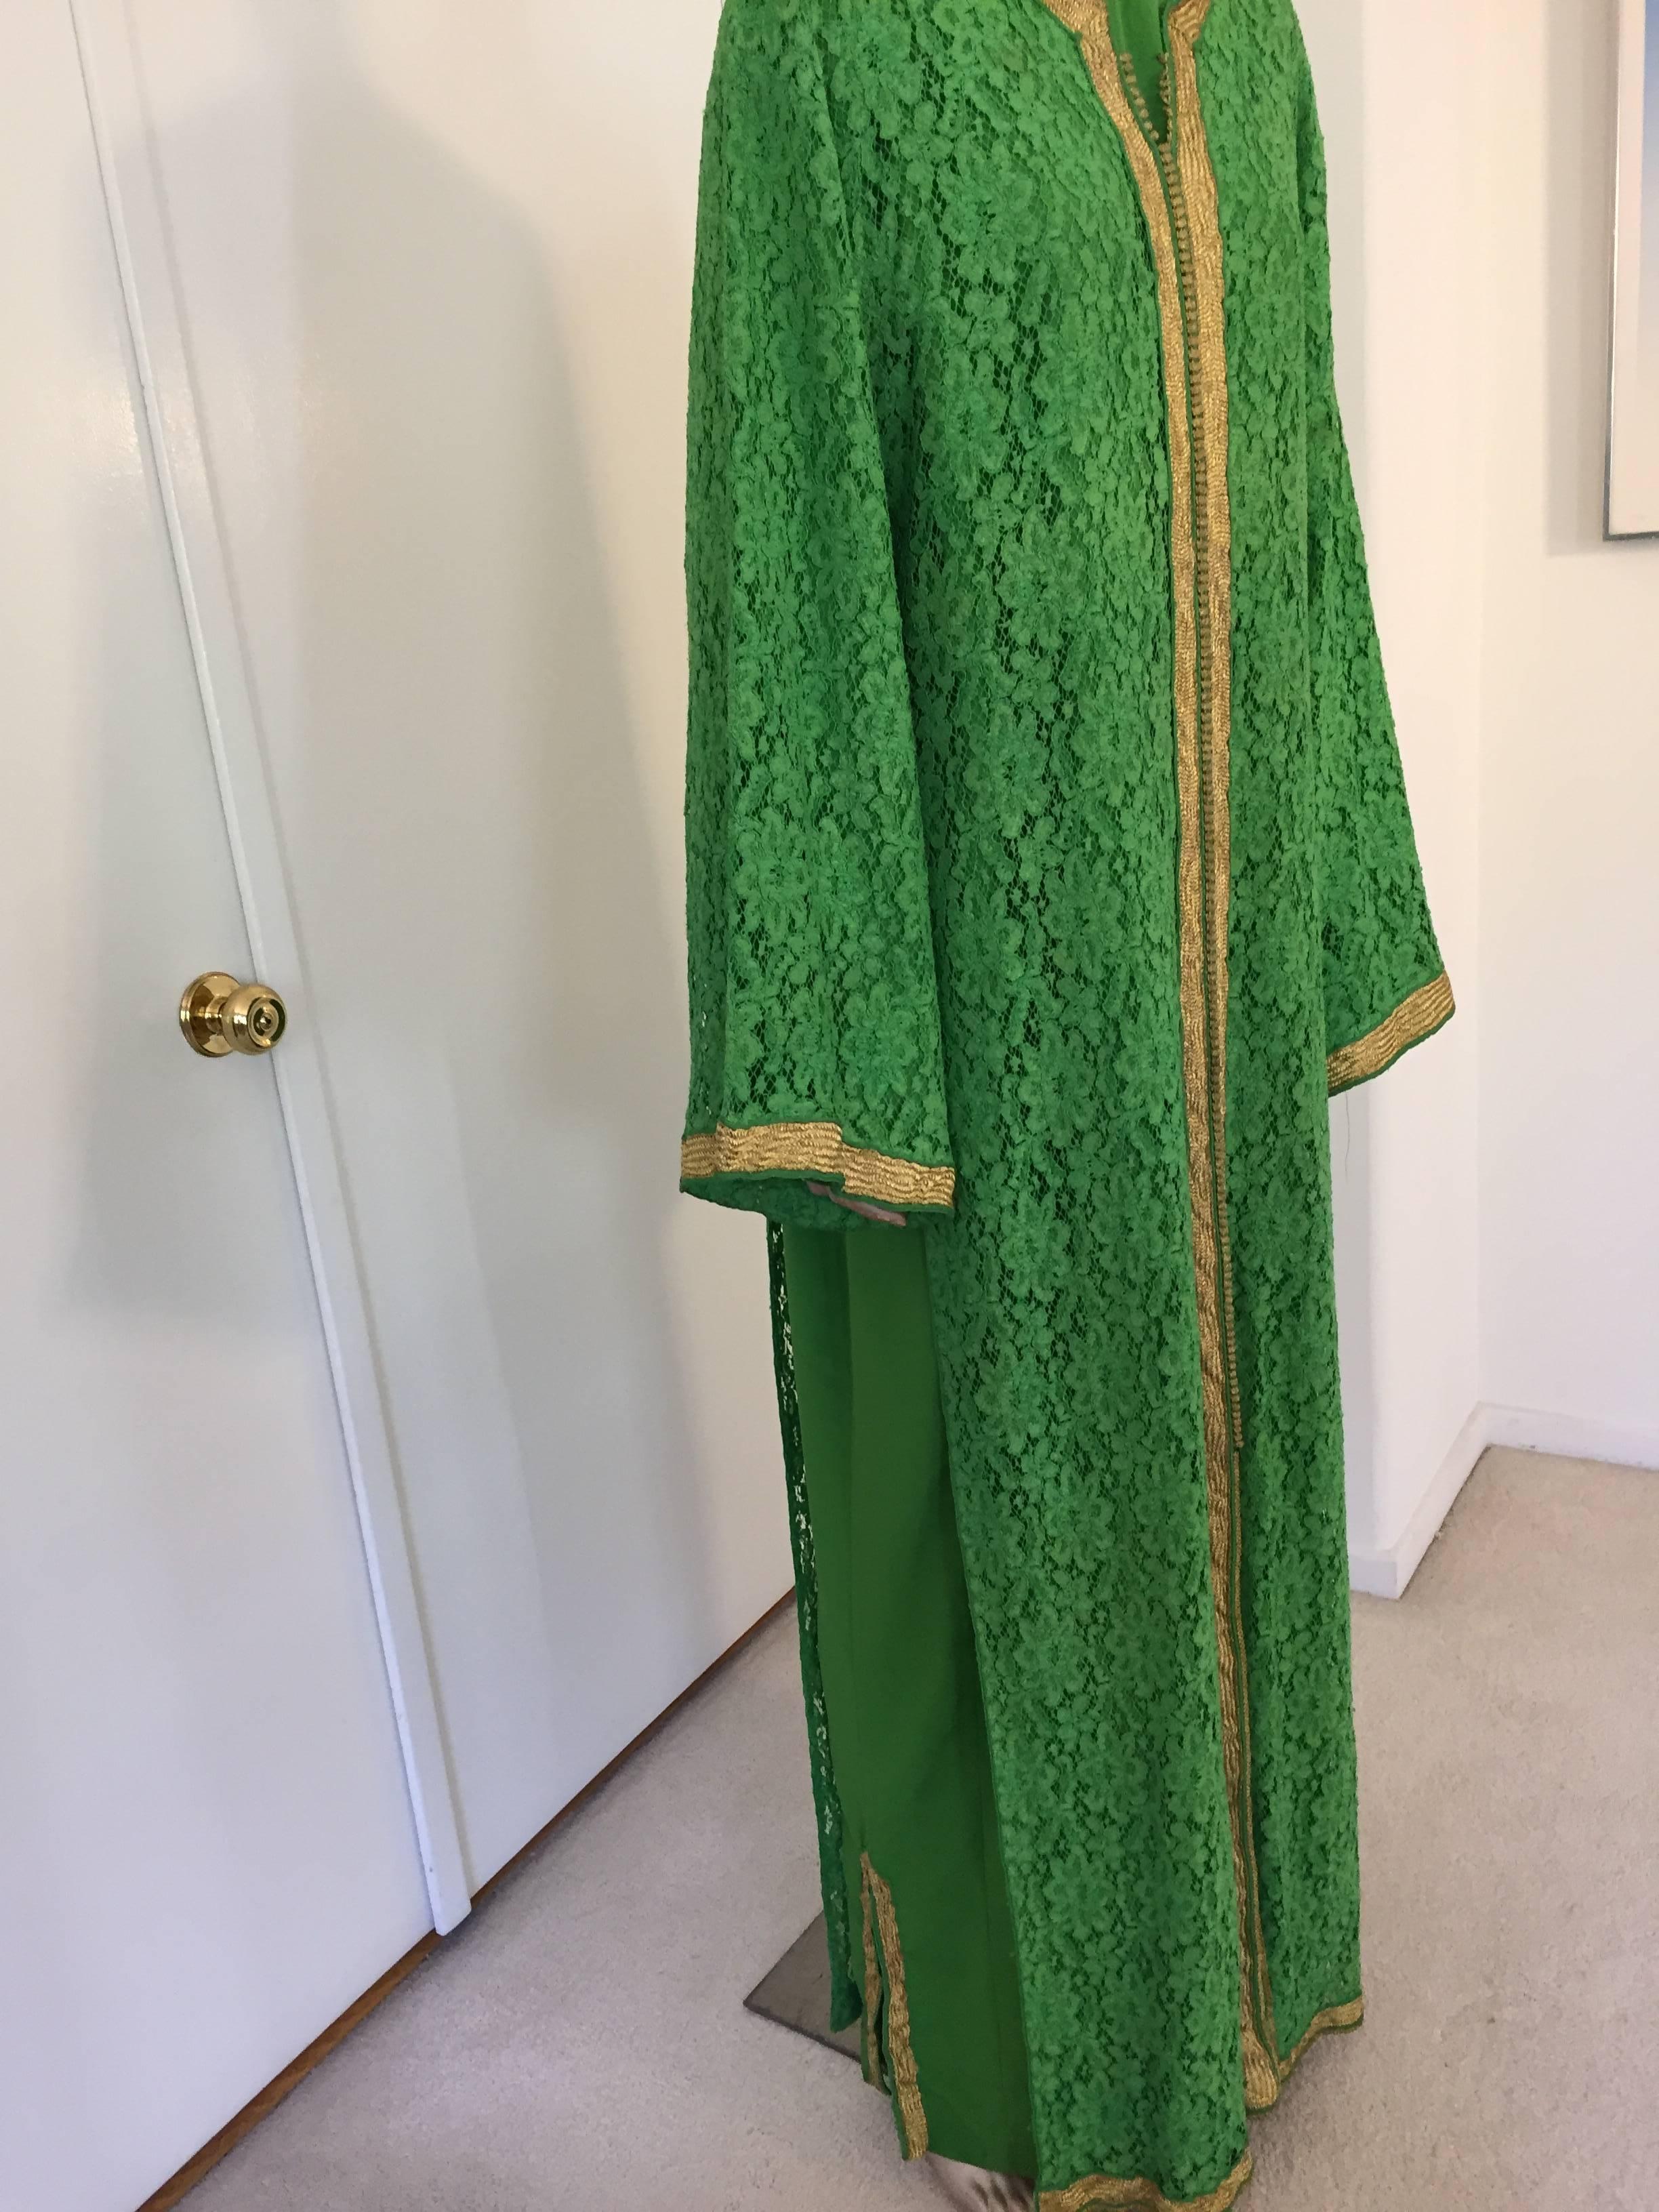 Elegant Moroccan caftan emerald green embroidered.
Made from French dentelle de Calais lace.
This is a set of two dresses that you can wear together or separate, 
circa 1980s.
This long maxi dress set kaftan is embroidered and embellished